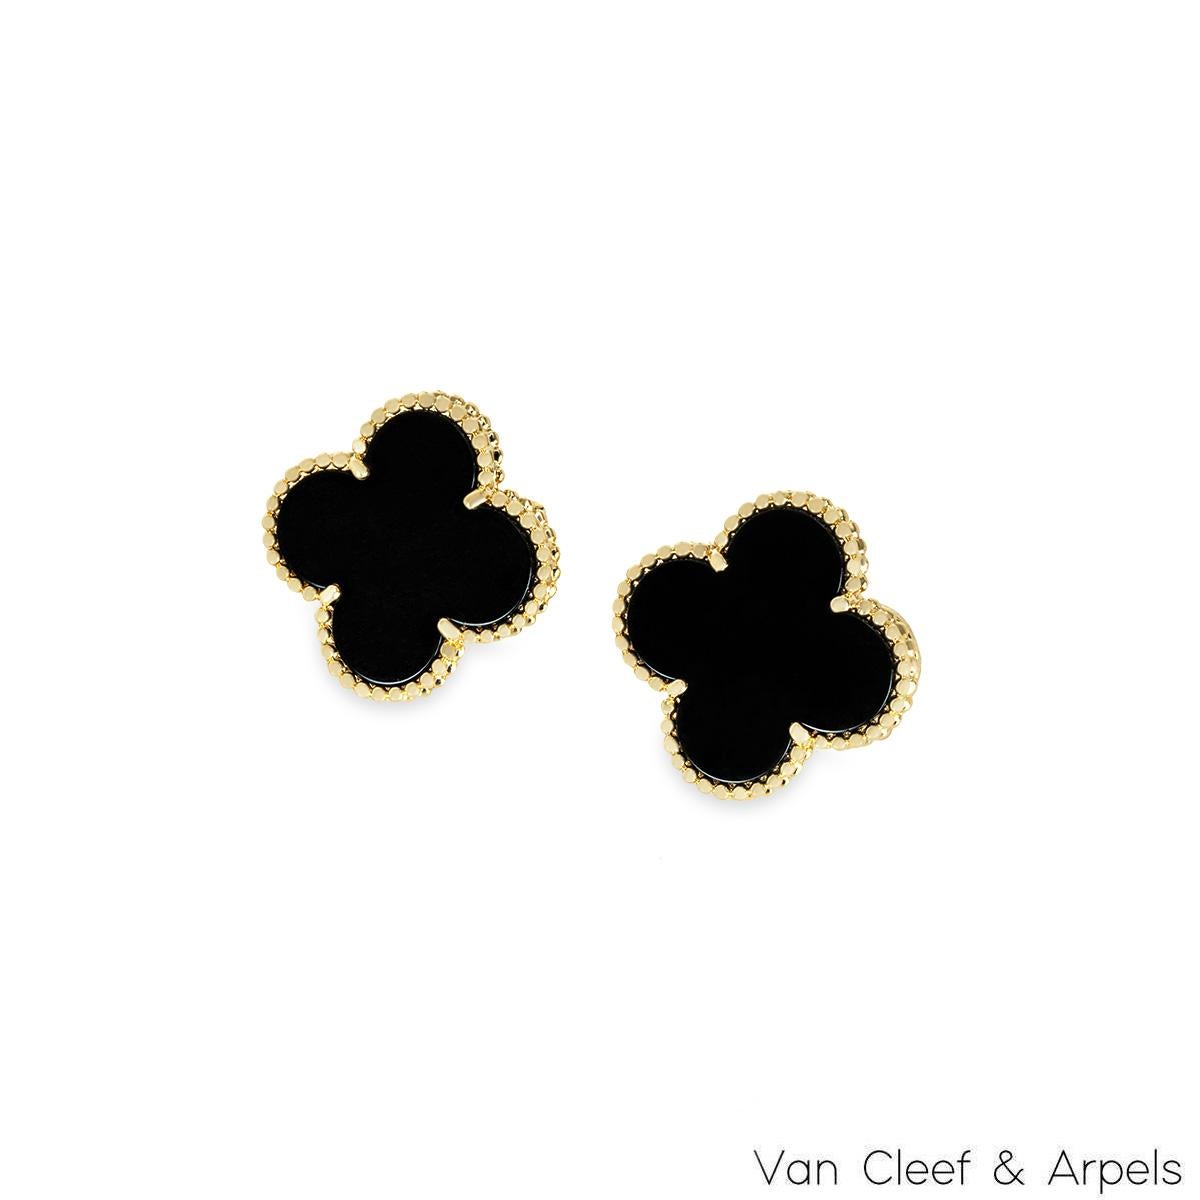 An iconic pair of 18k yellow gold Van Cleef & Arpels earrings from the Magic Alhambra collection. The earrings are composed of a four leaf clover motif with an onyx inlay, complimented by a beaded edge. The 19.5mm wide earrings feature removable